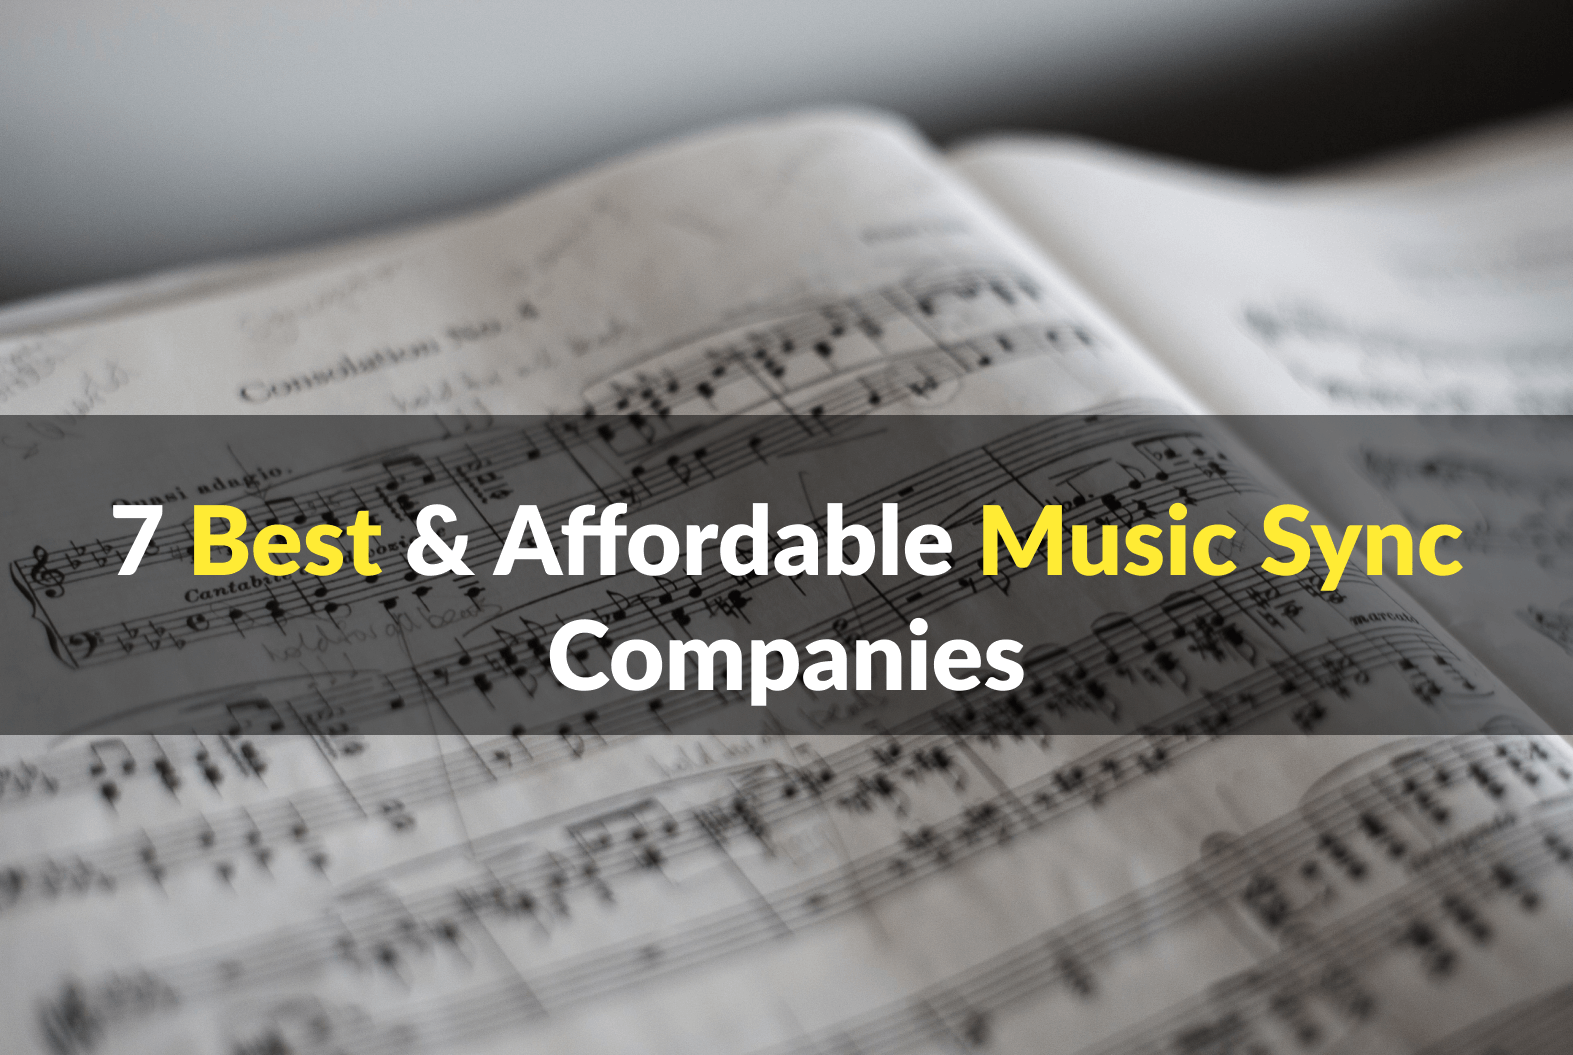 7 Best & Affordable Music Sync Companies